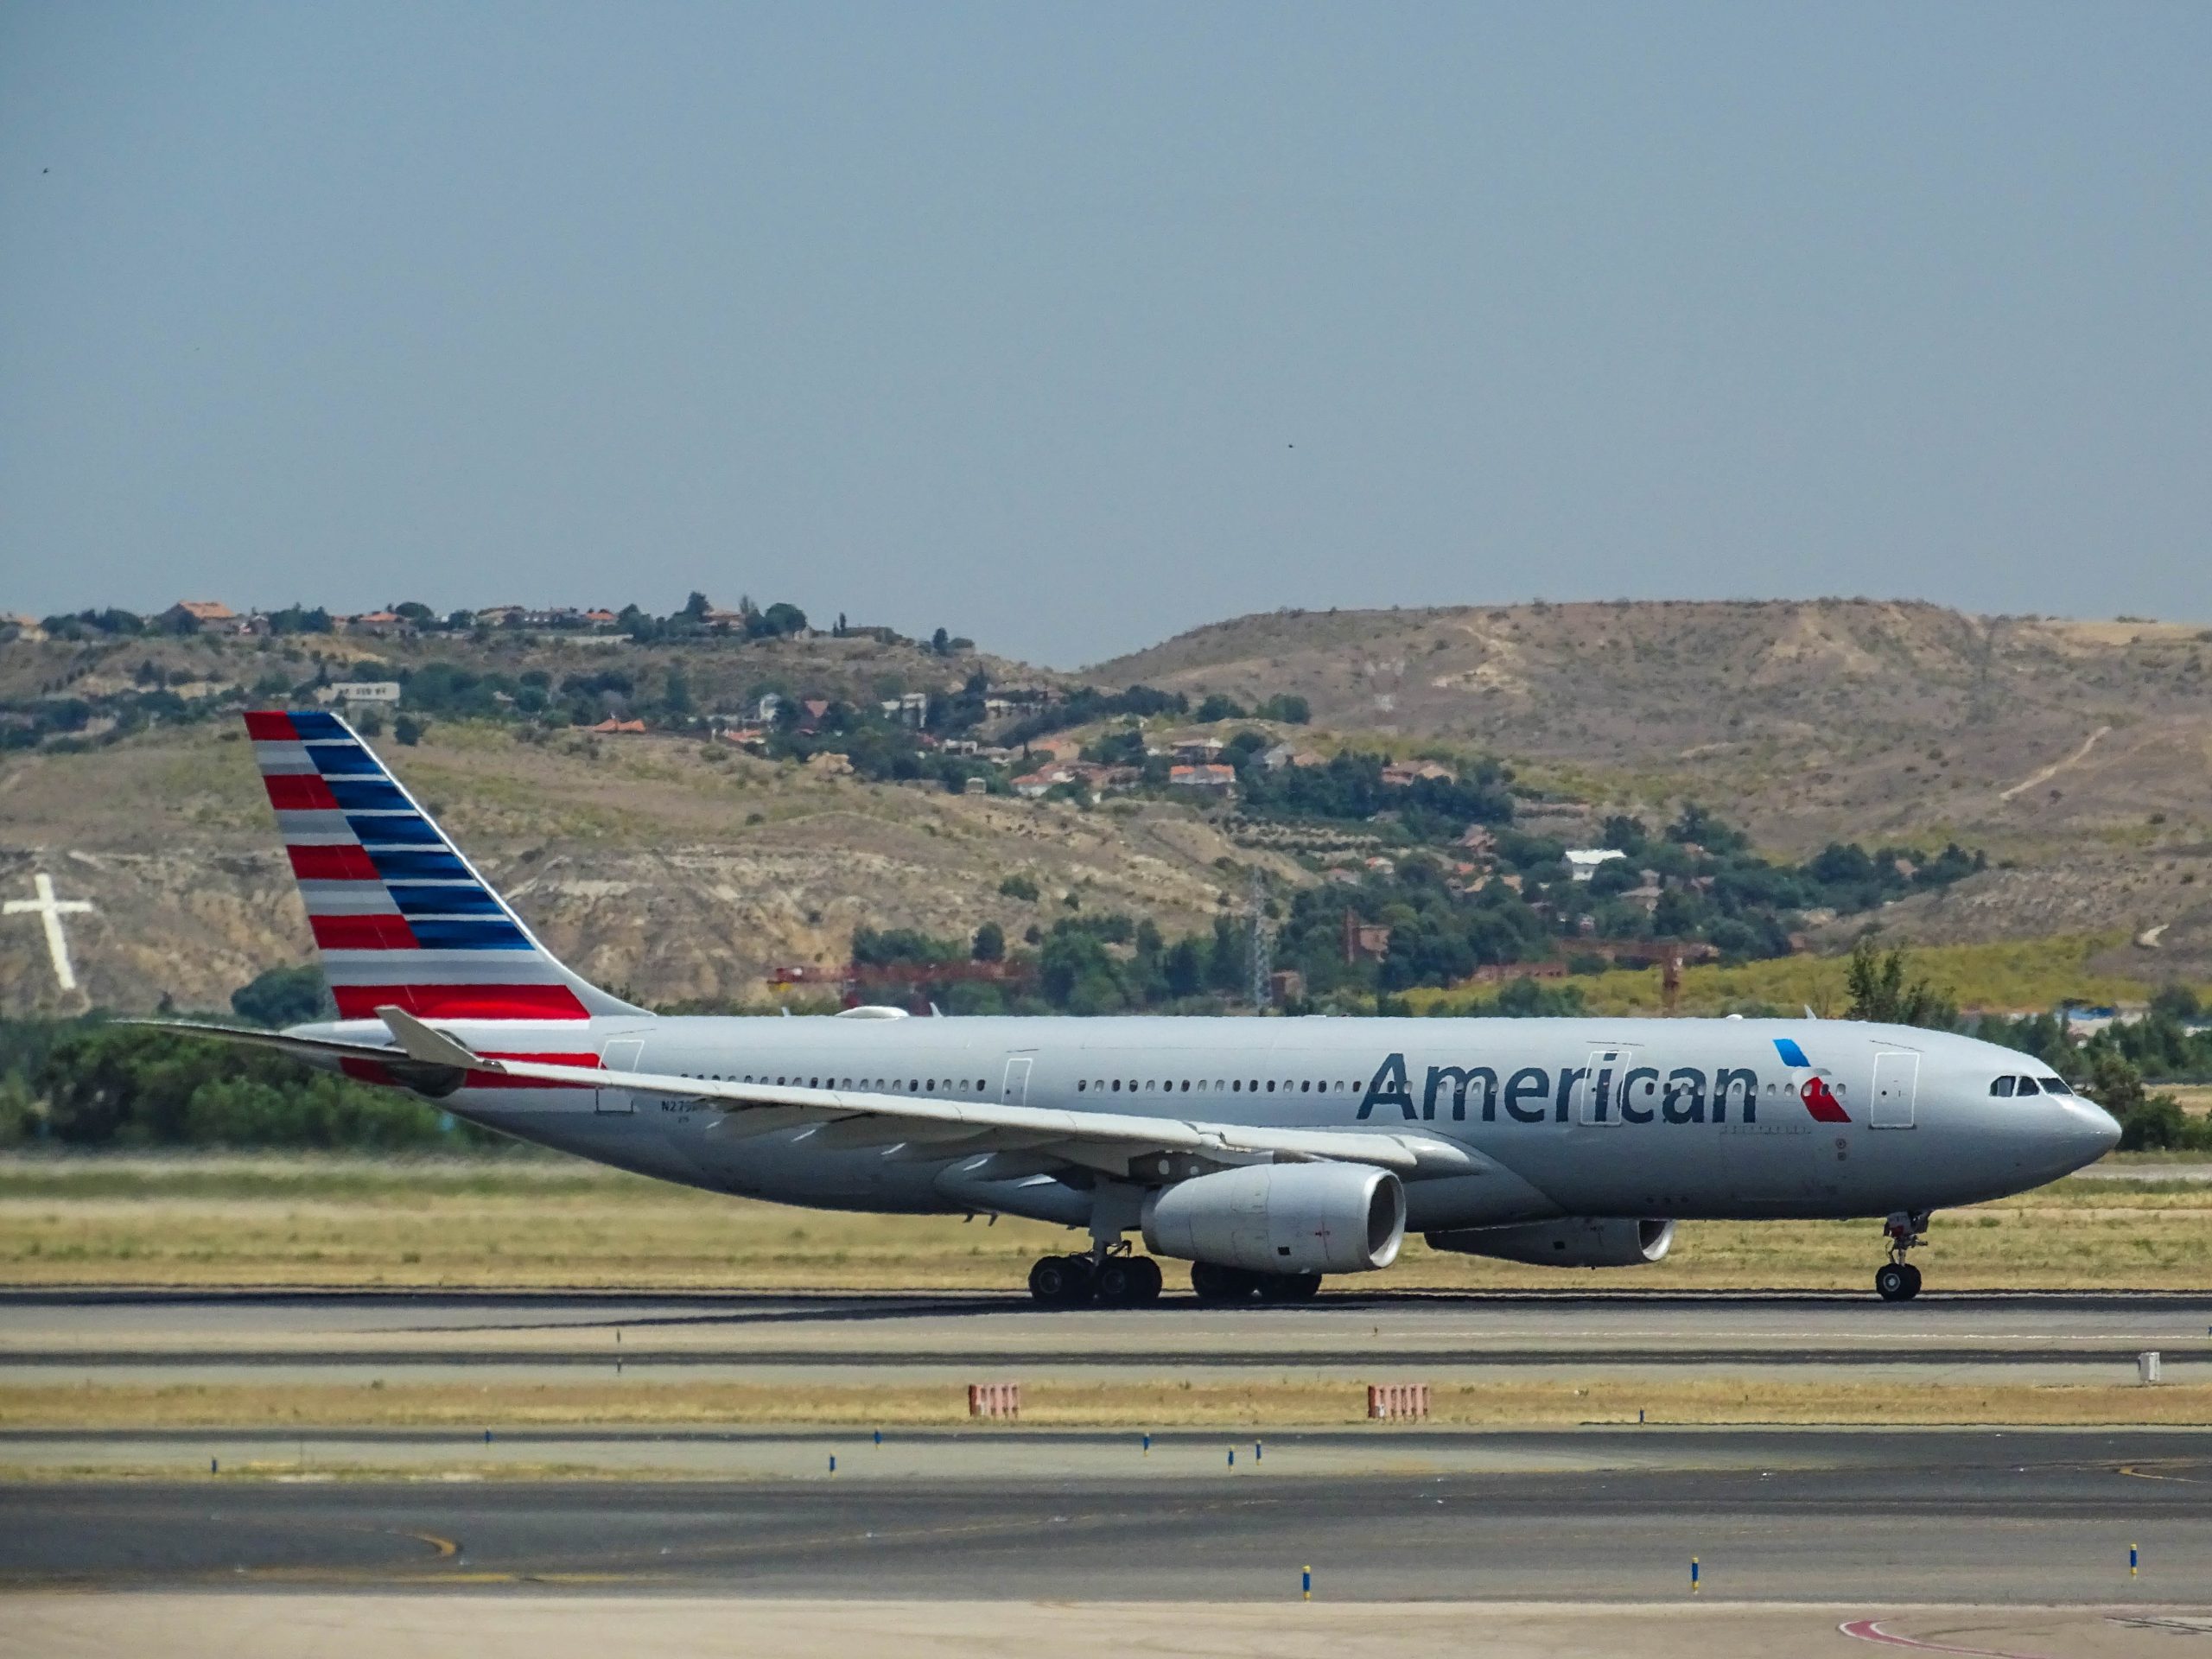 America Airlines' flights to Brazil are coming back. - Get Trips